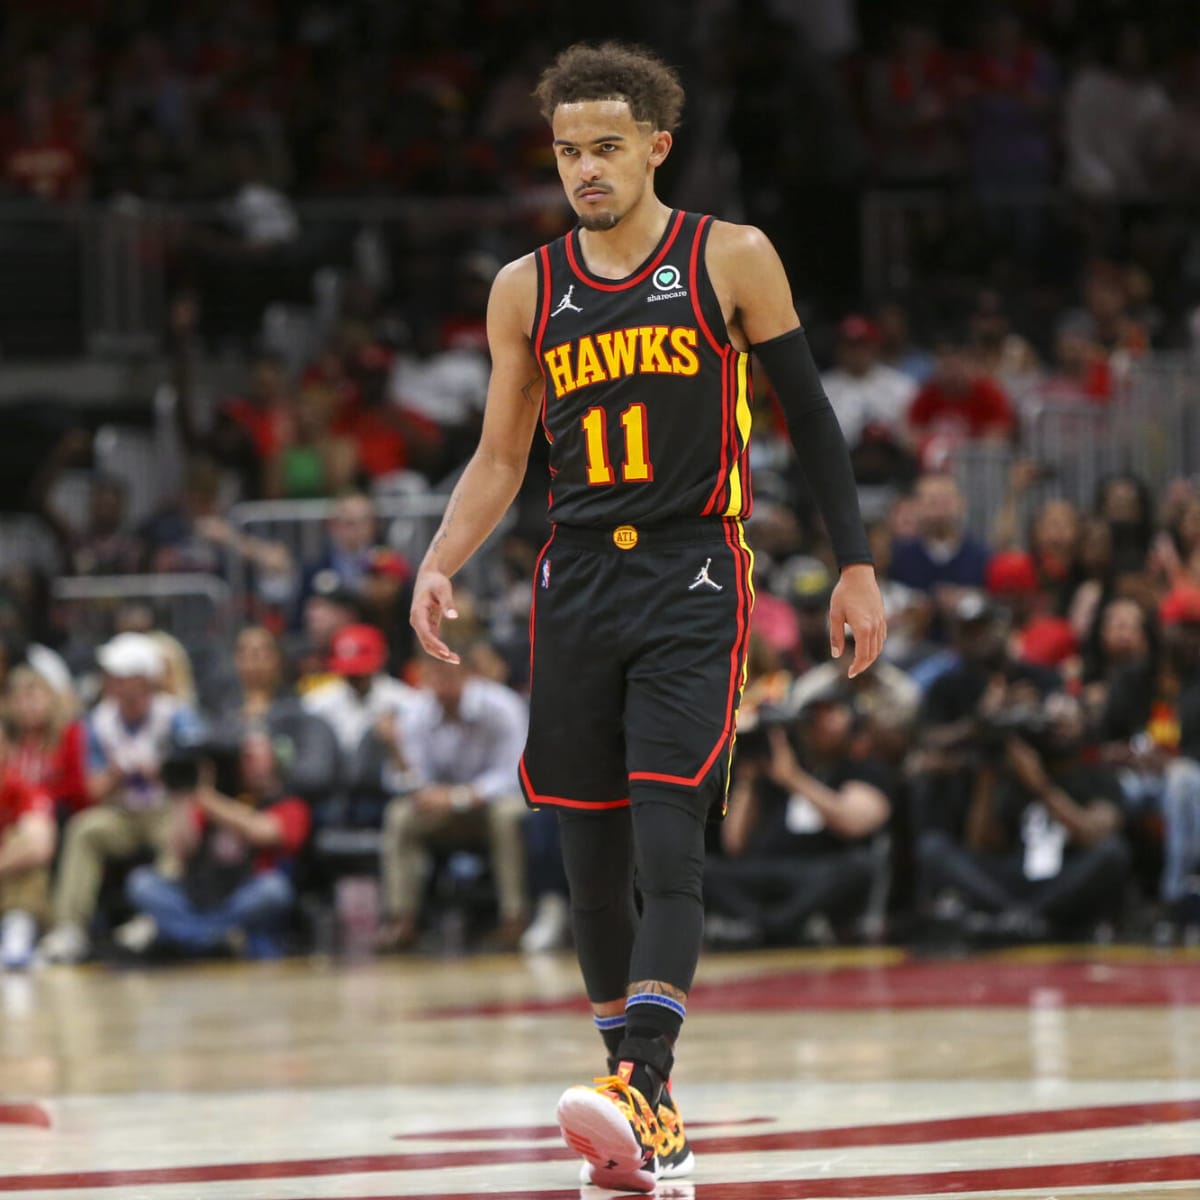 Hoop Central on X: Trae Young: 25 PTS - 13 AST - 4 REB Dejounte Murray: 20  PTS - 9 AST - 9 REB Hawks 2-0  / X